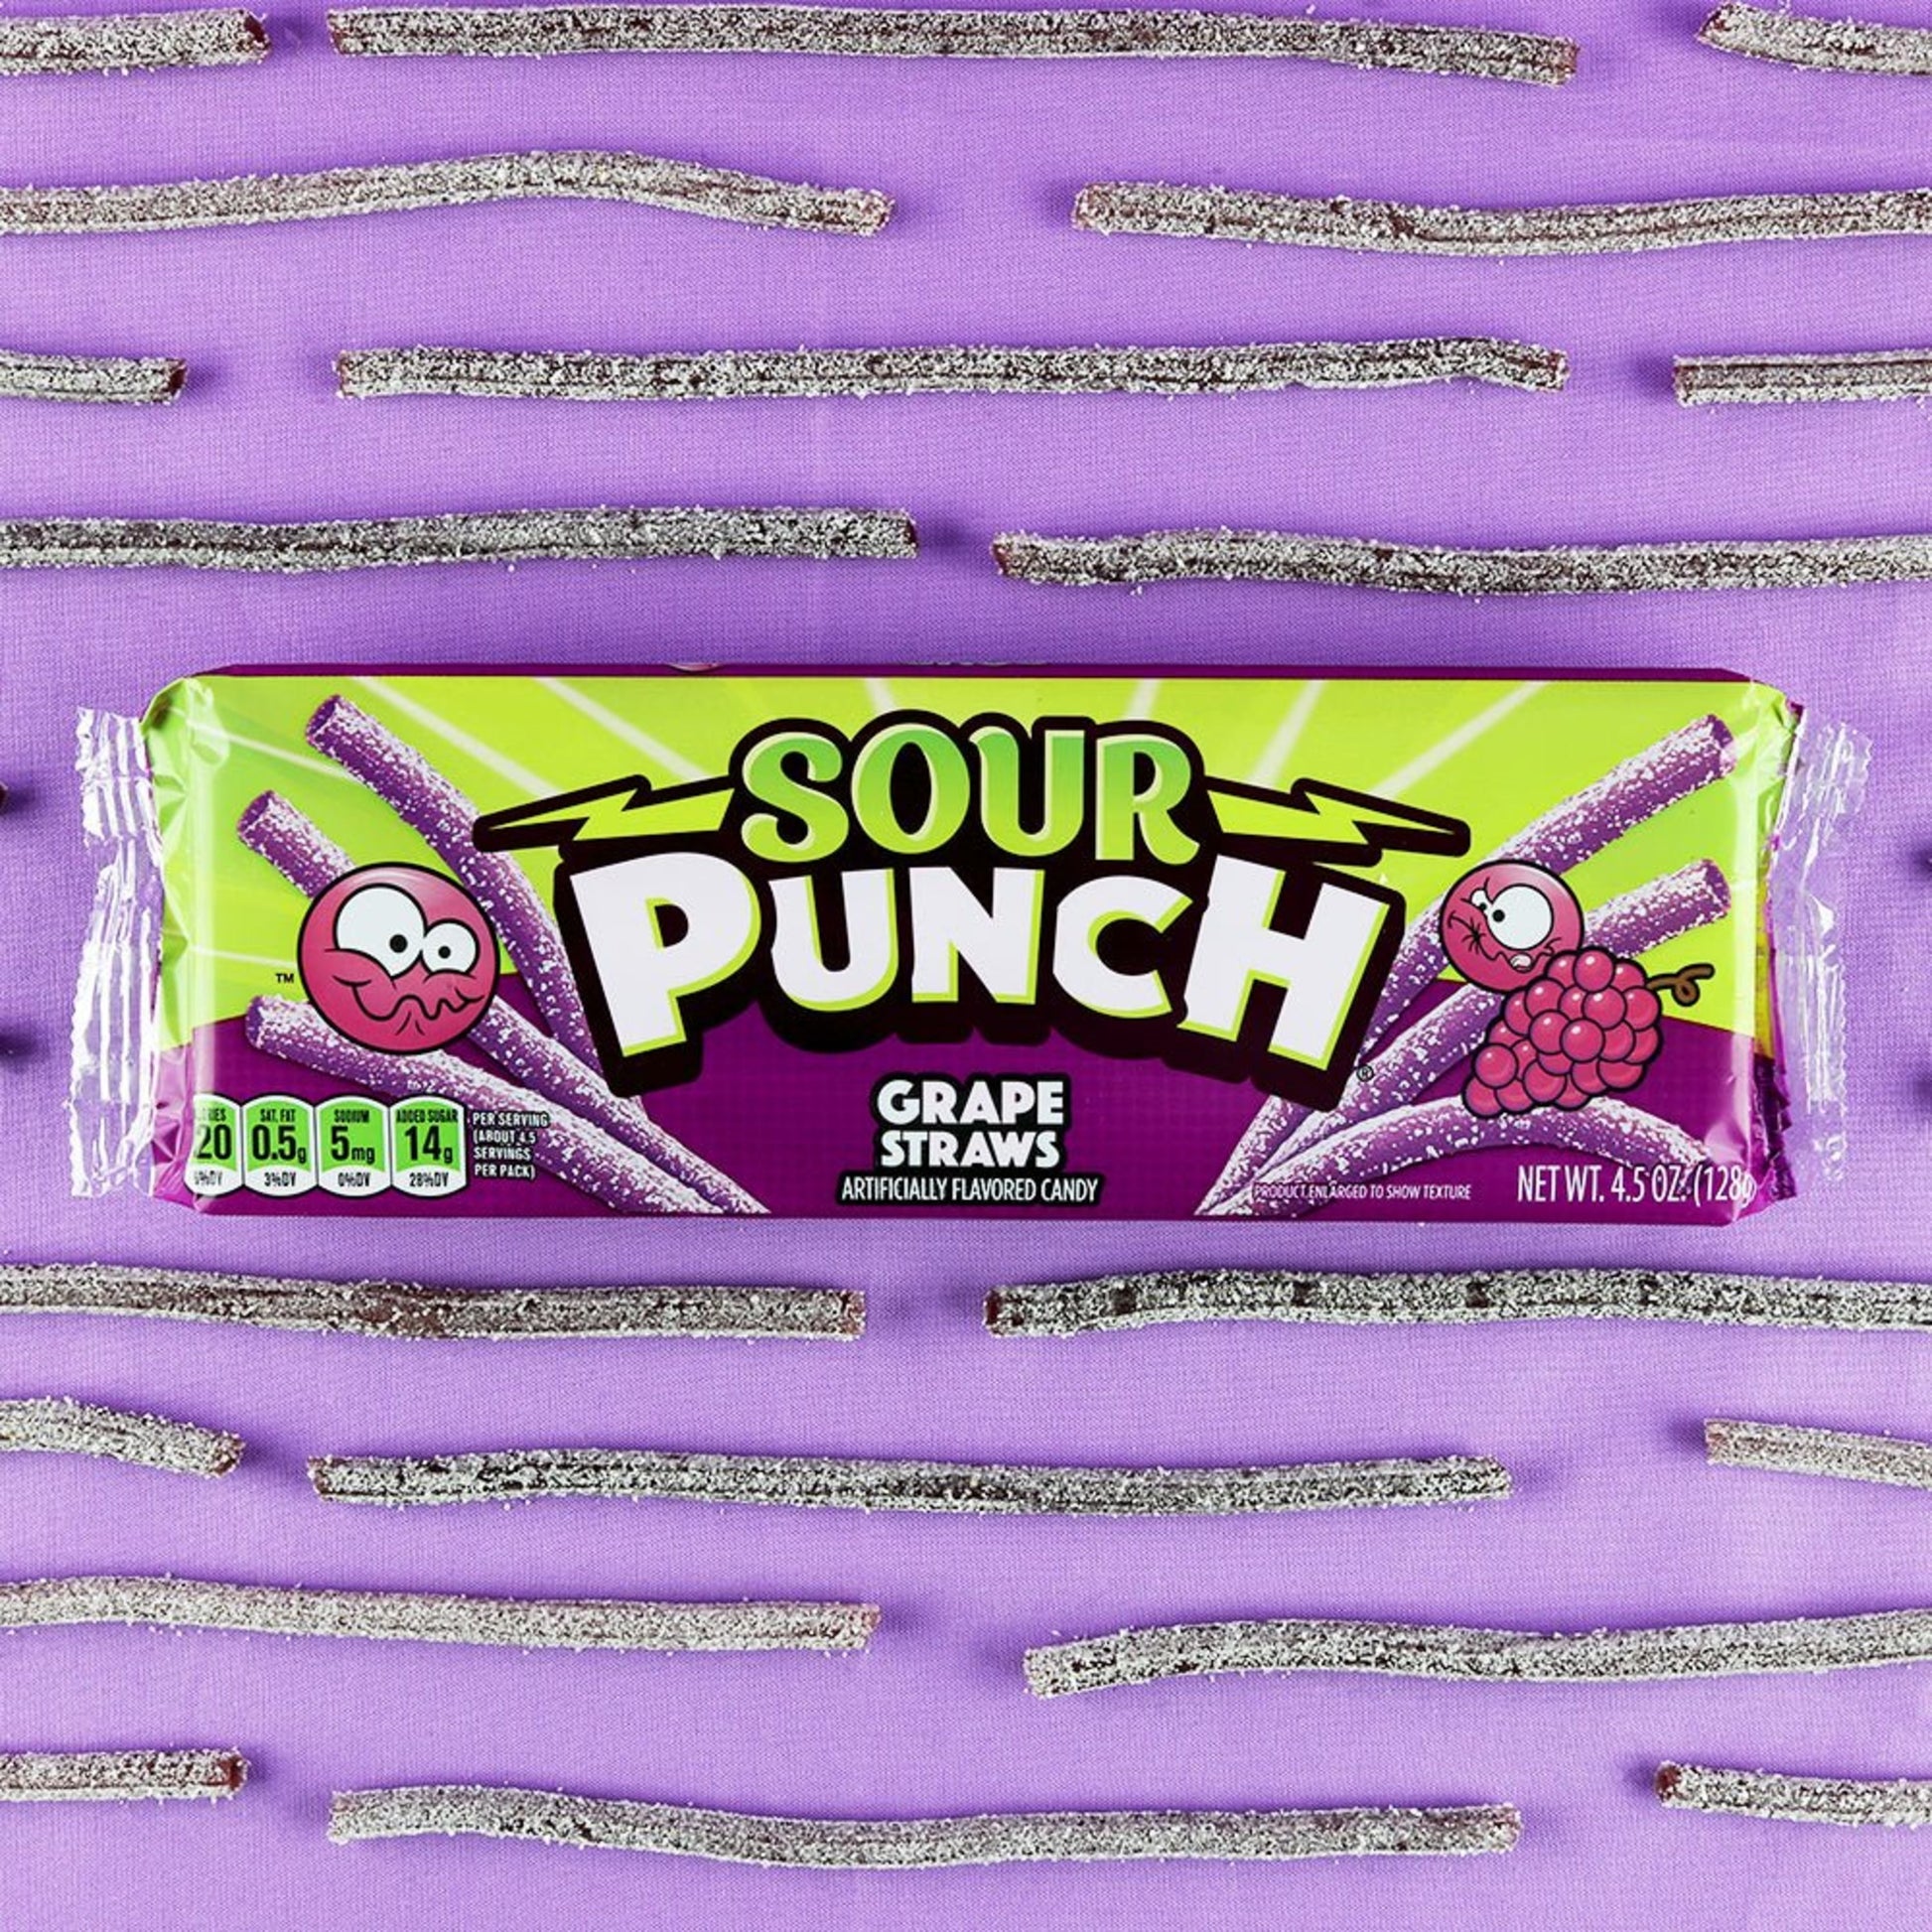 Sour Punch Grape Candy Straws on Purple Background - Sour Punch Grape Straws